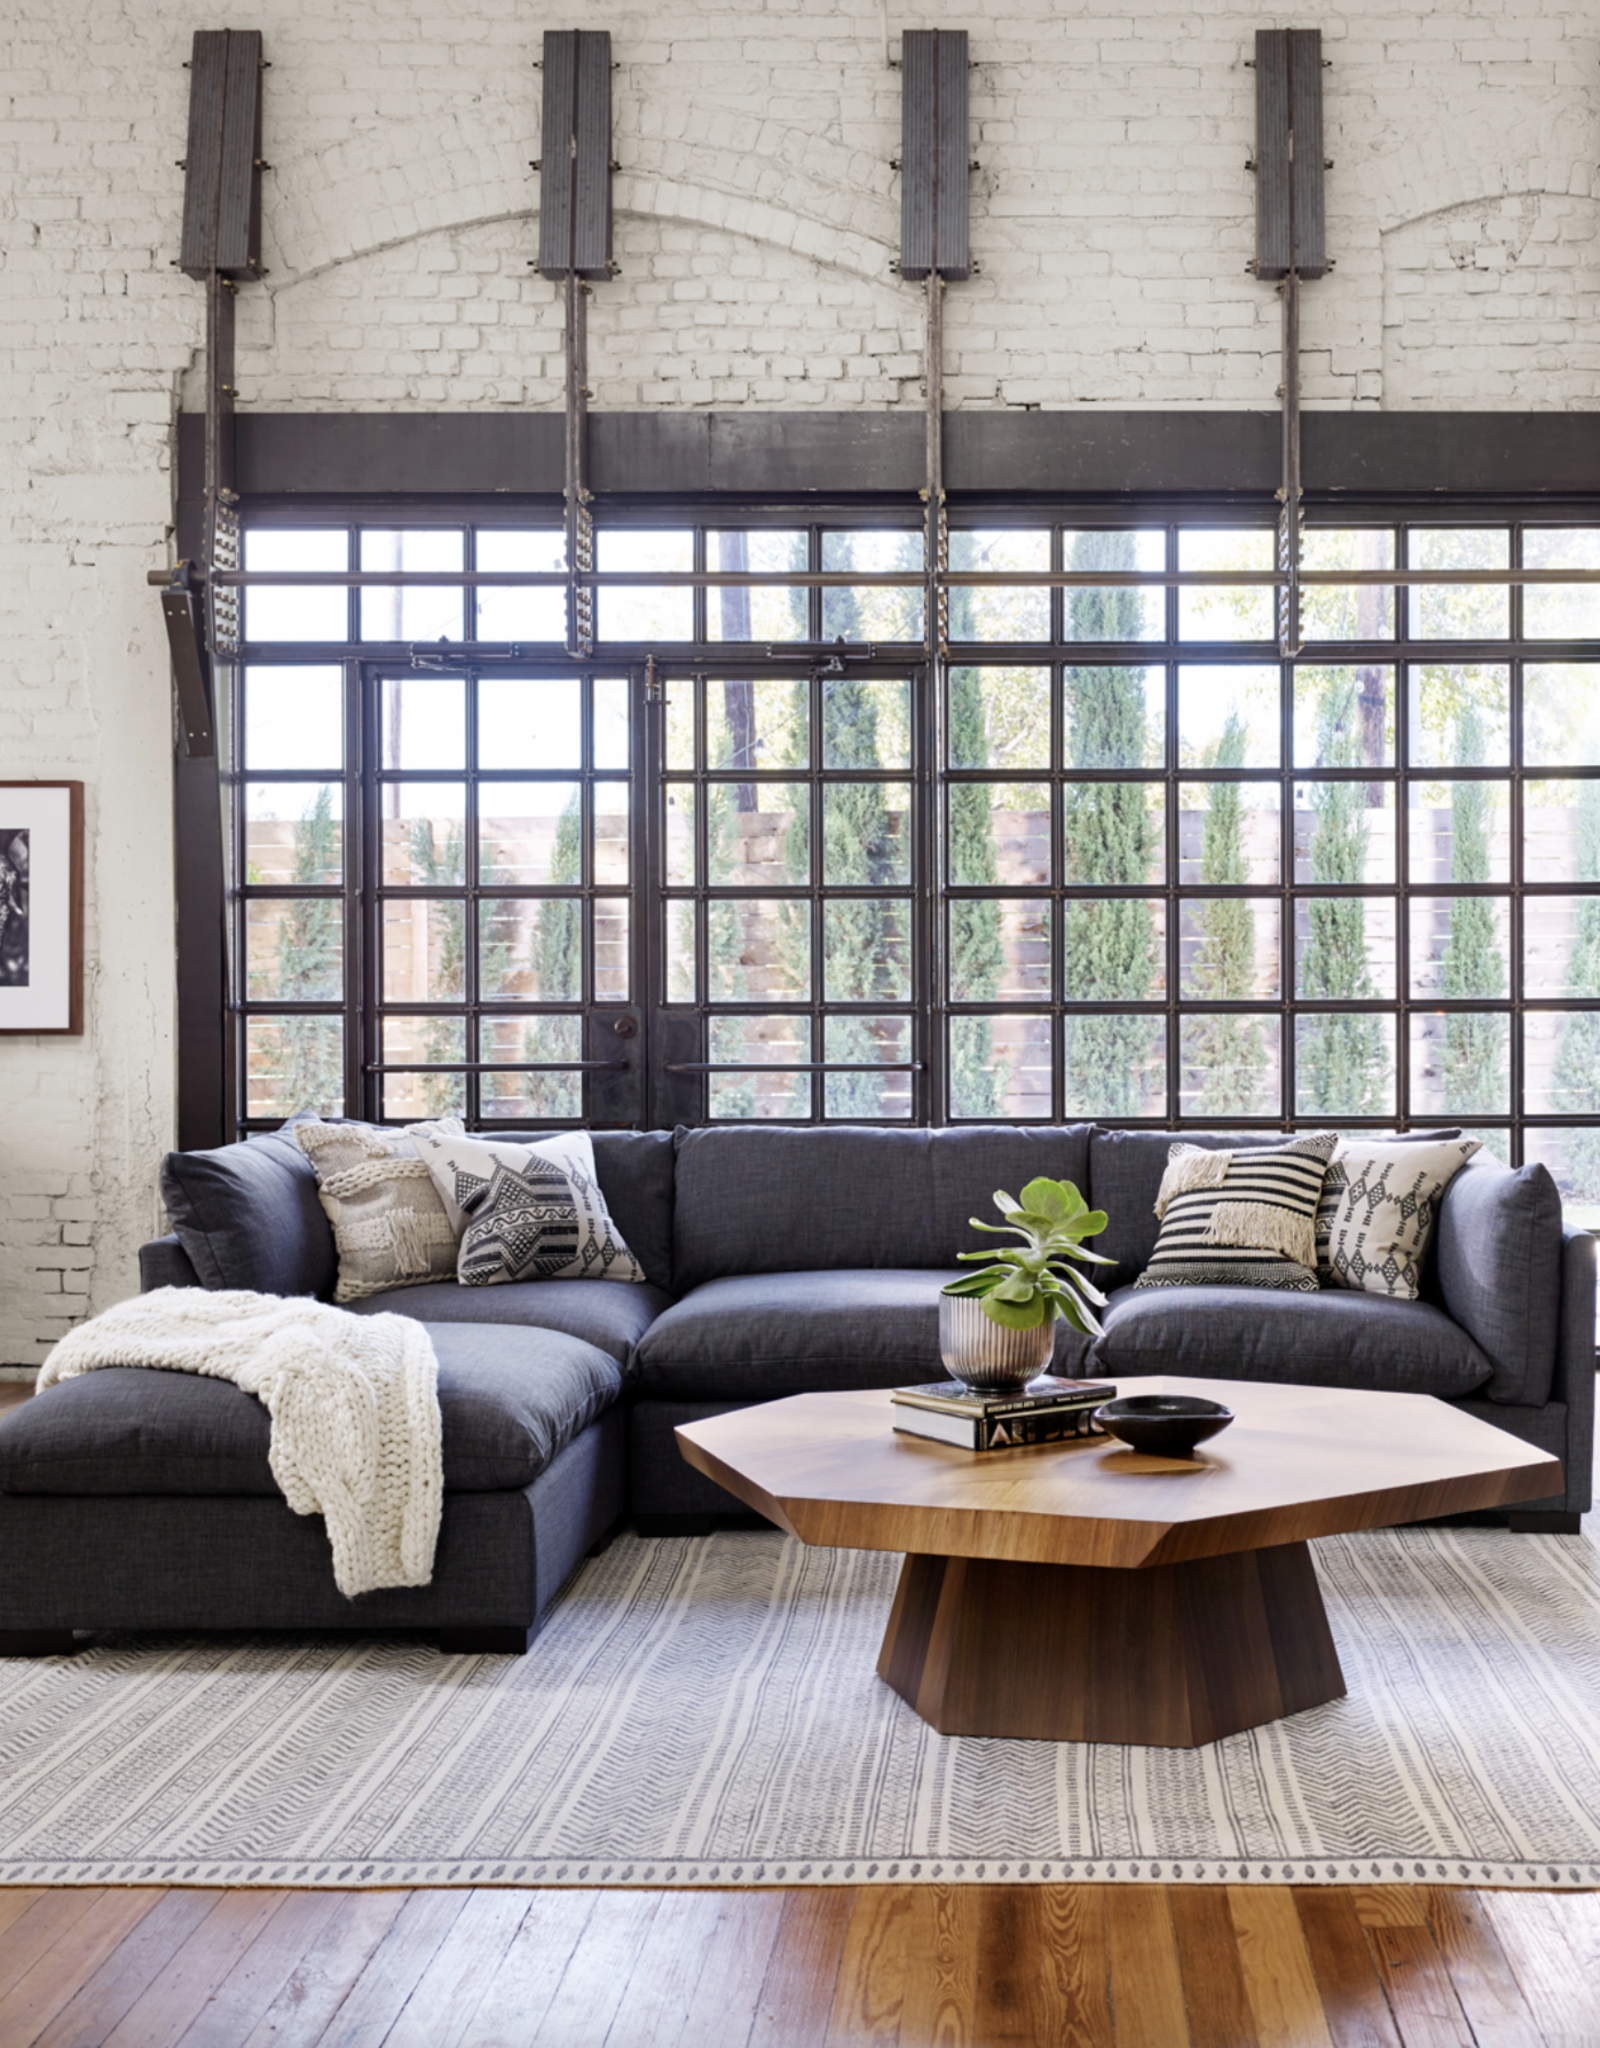 Westwood 3-Pc Sectional with Ottoman in Bennett Charcoal